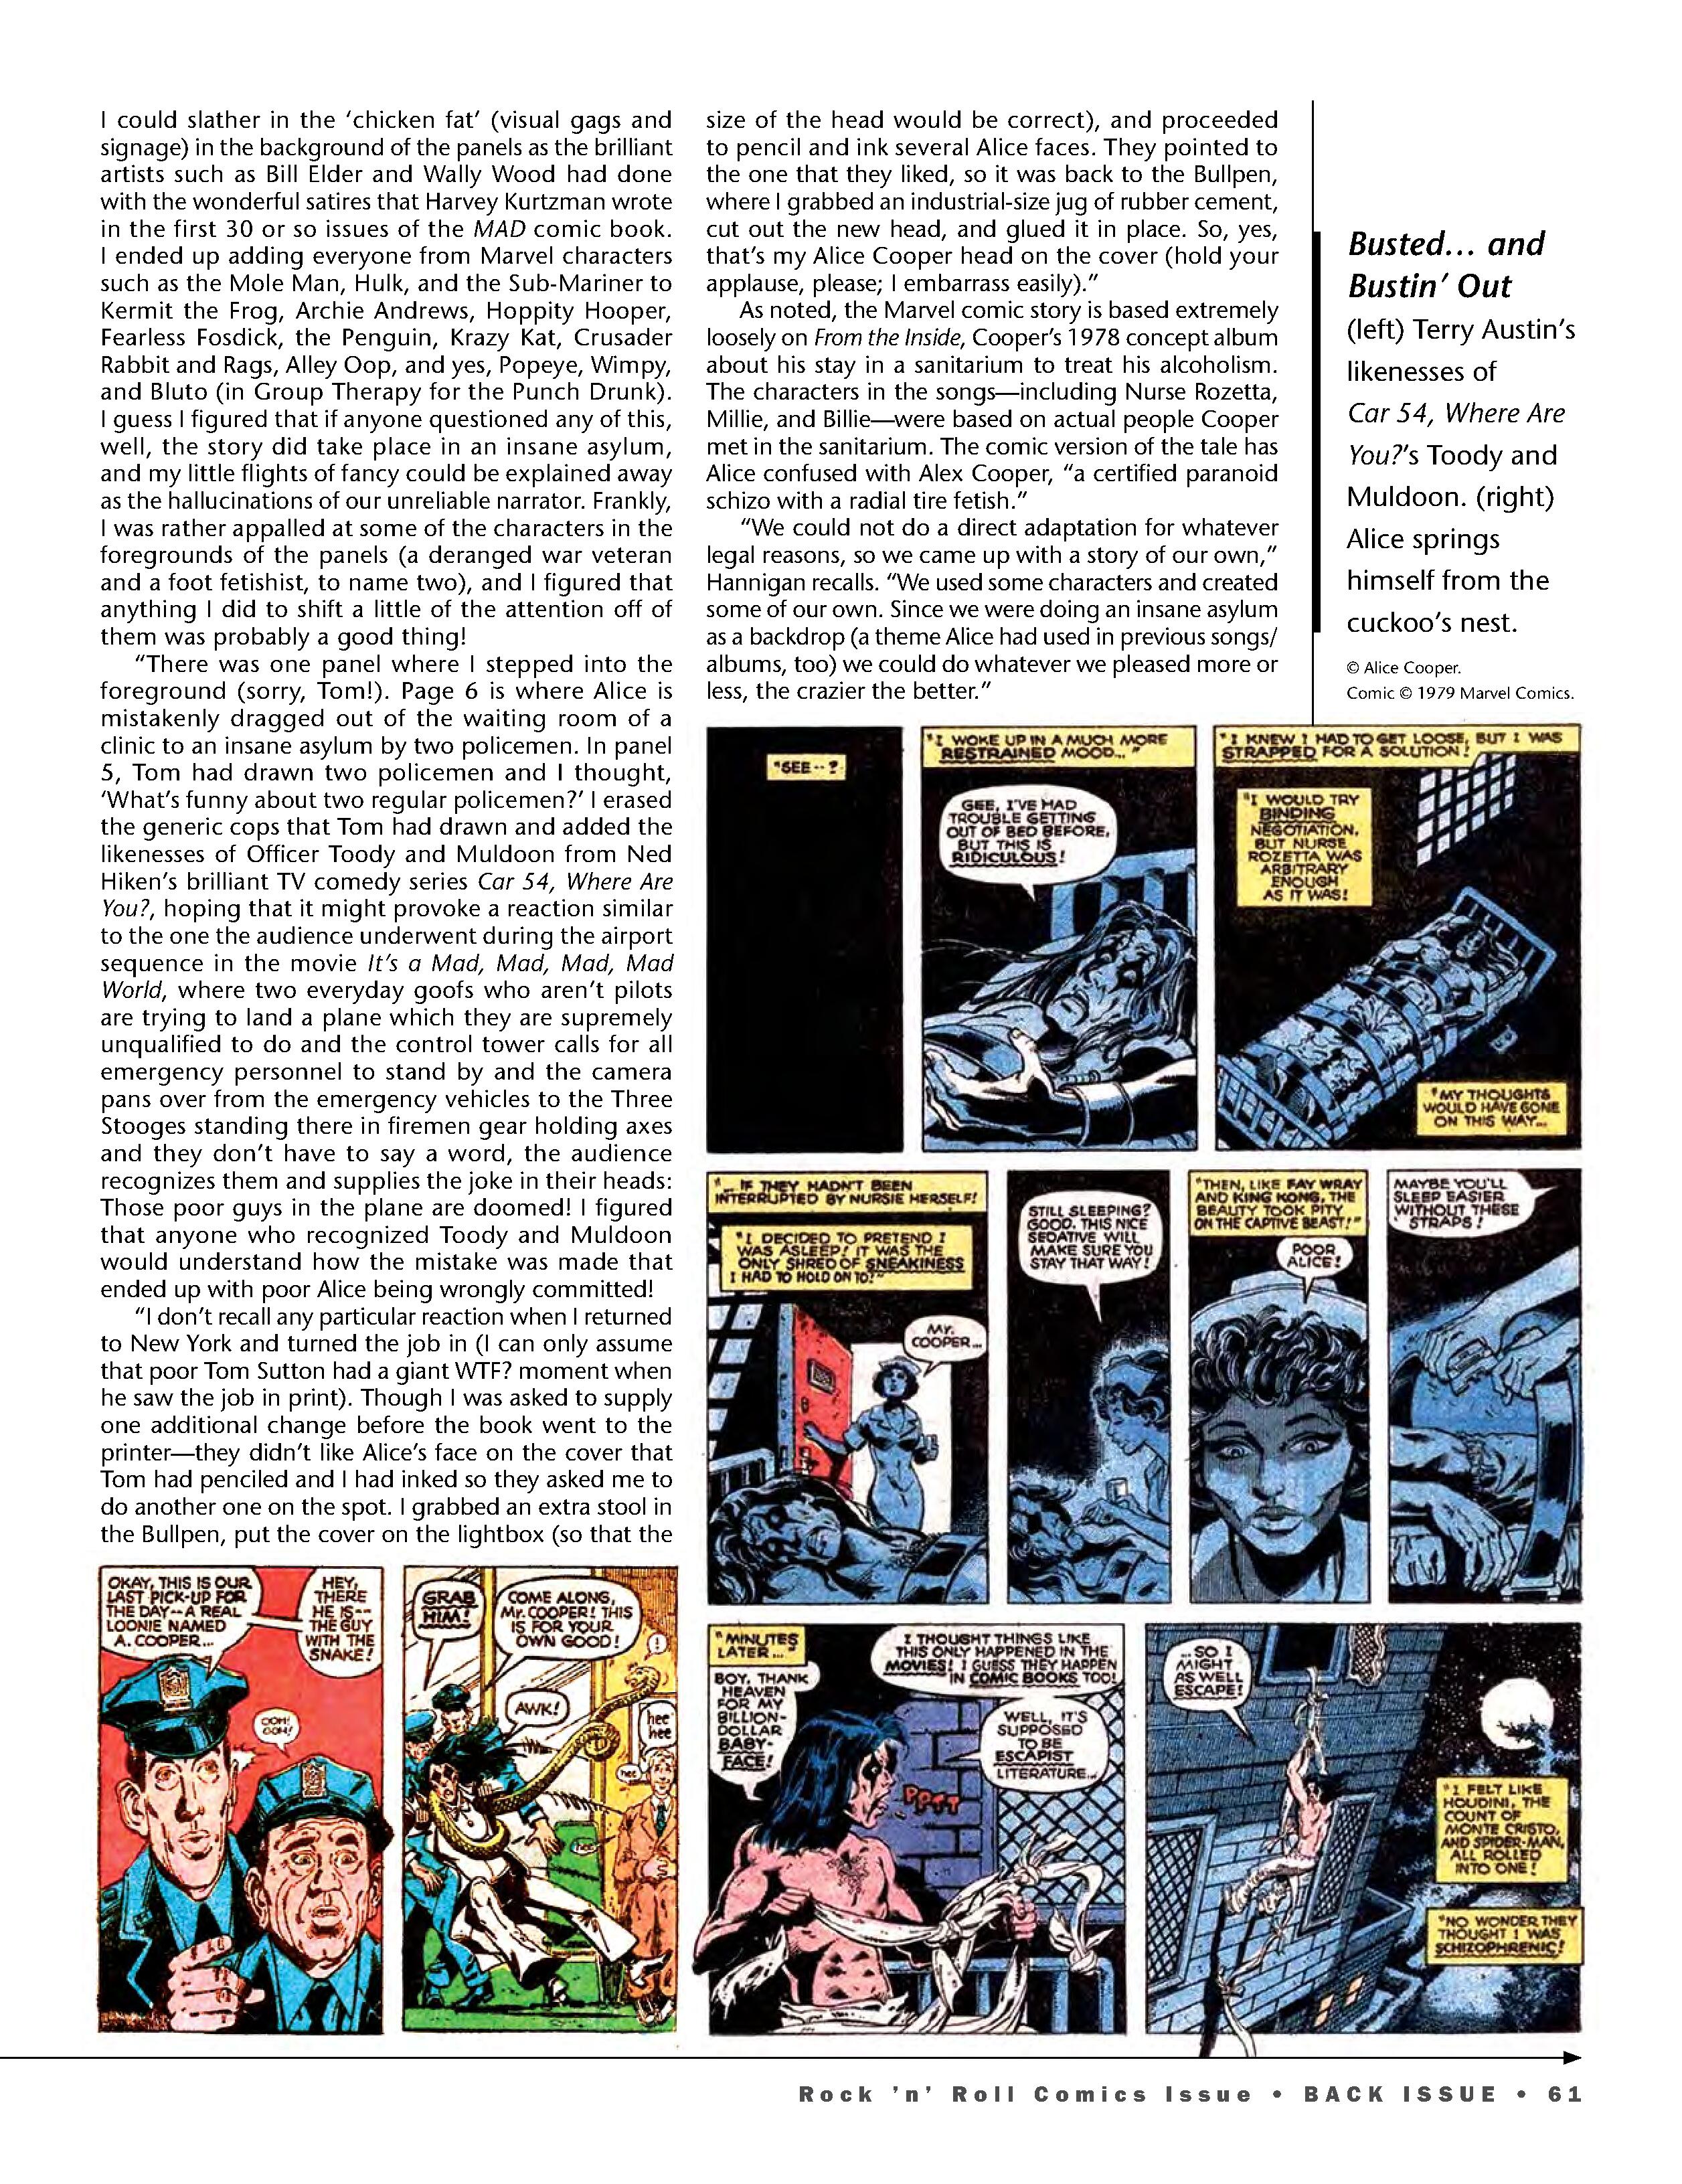 Read online Back Issue comic -  Issue #101 - 63